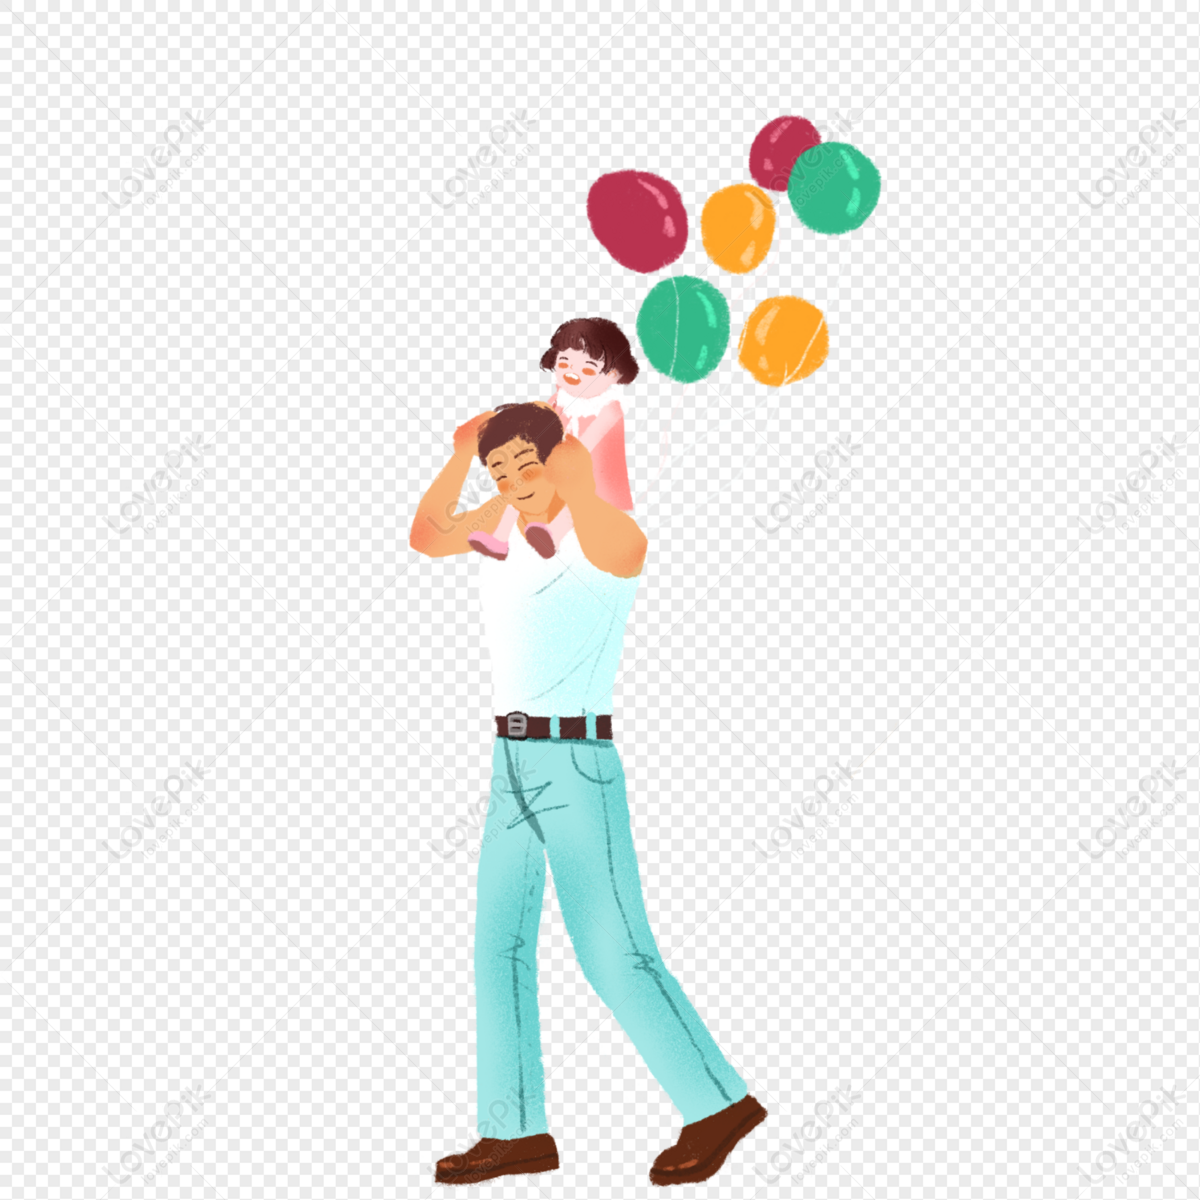 Father Carrying Daughter PNG Hd Transparent Image And Clipart Image For ...